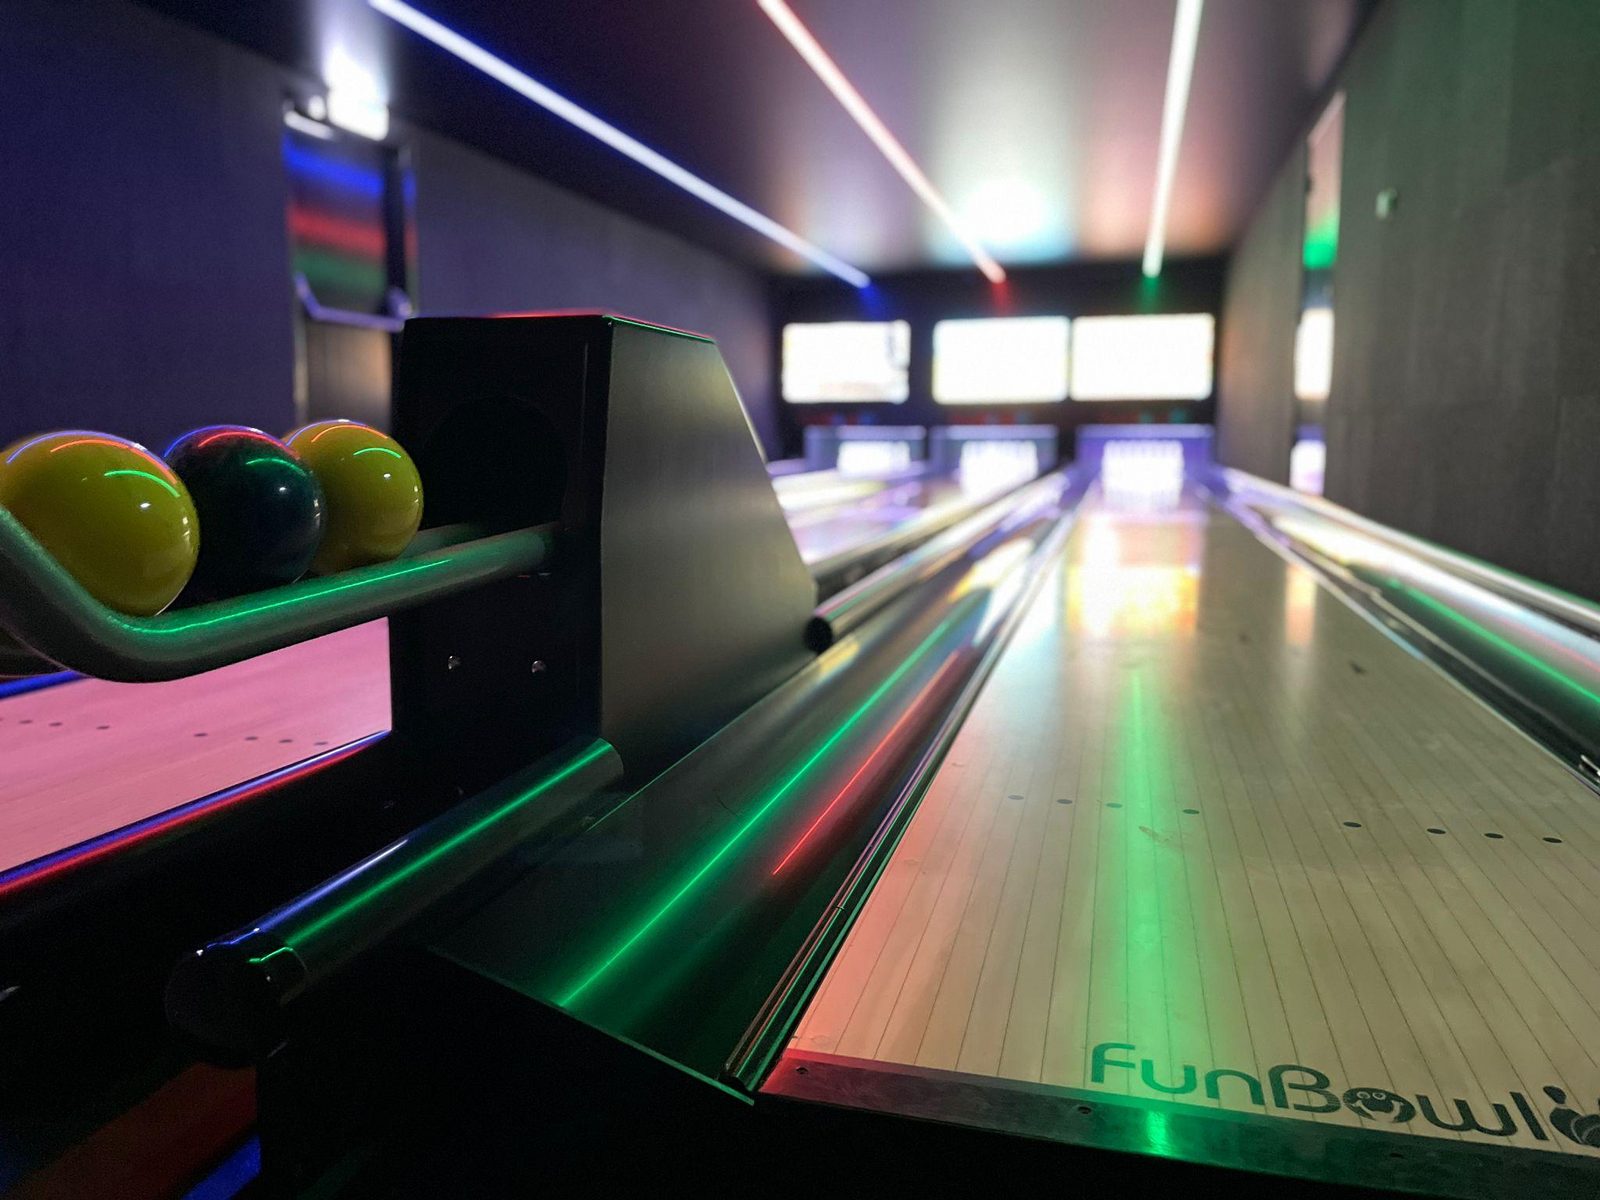 FunBowling